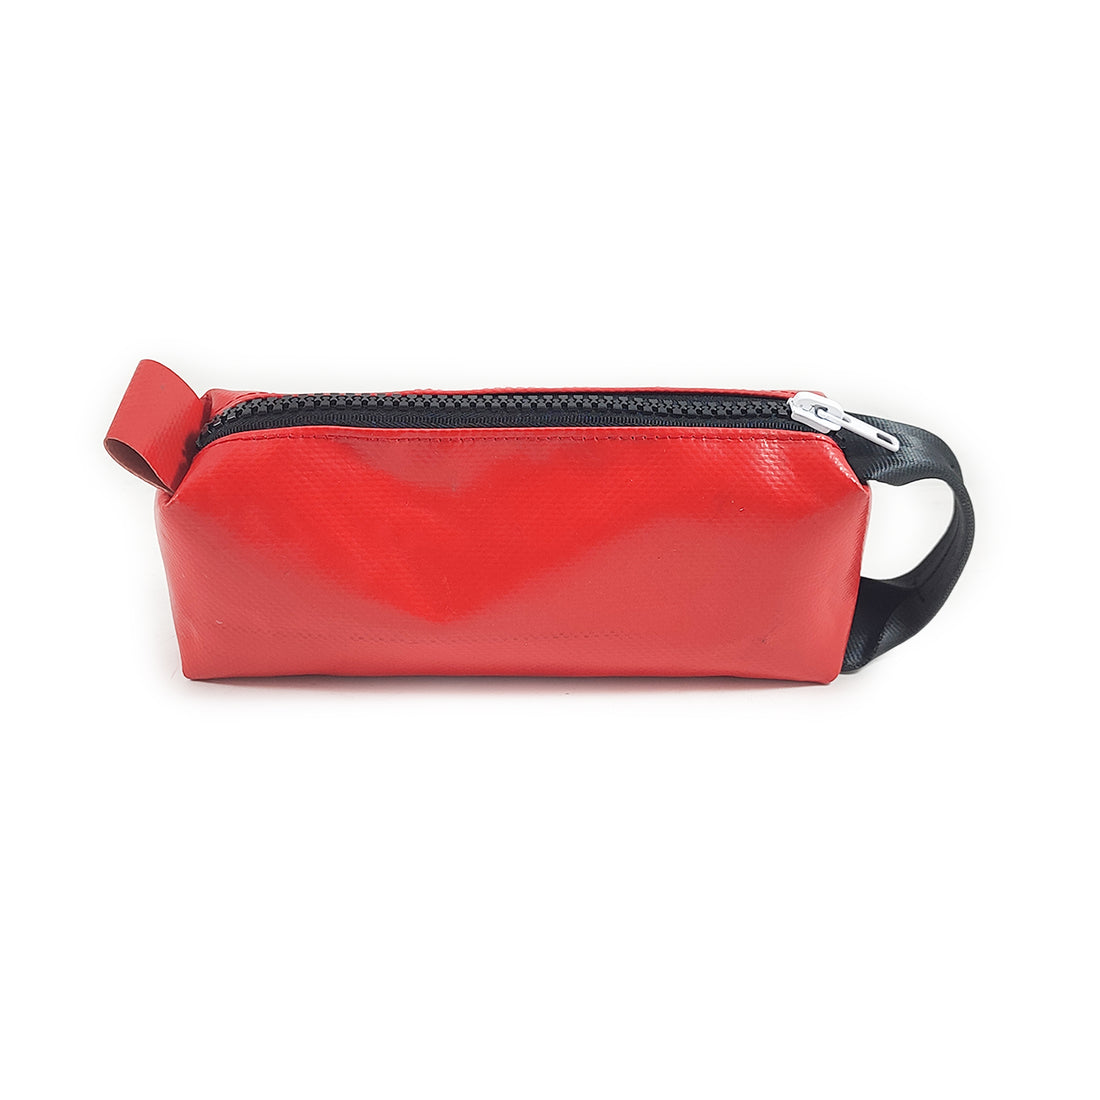 J-Pouch | 001 - Pencil Case and Toiletry Bag Made From UpCycled Materials